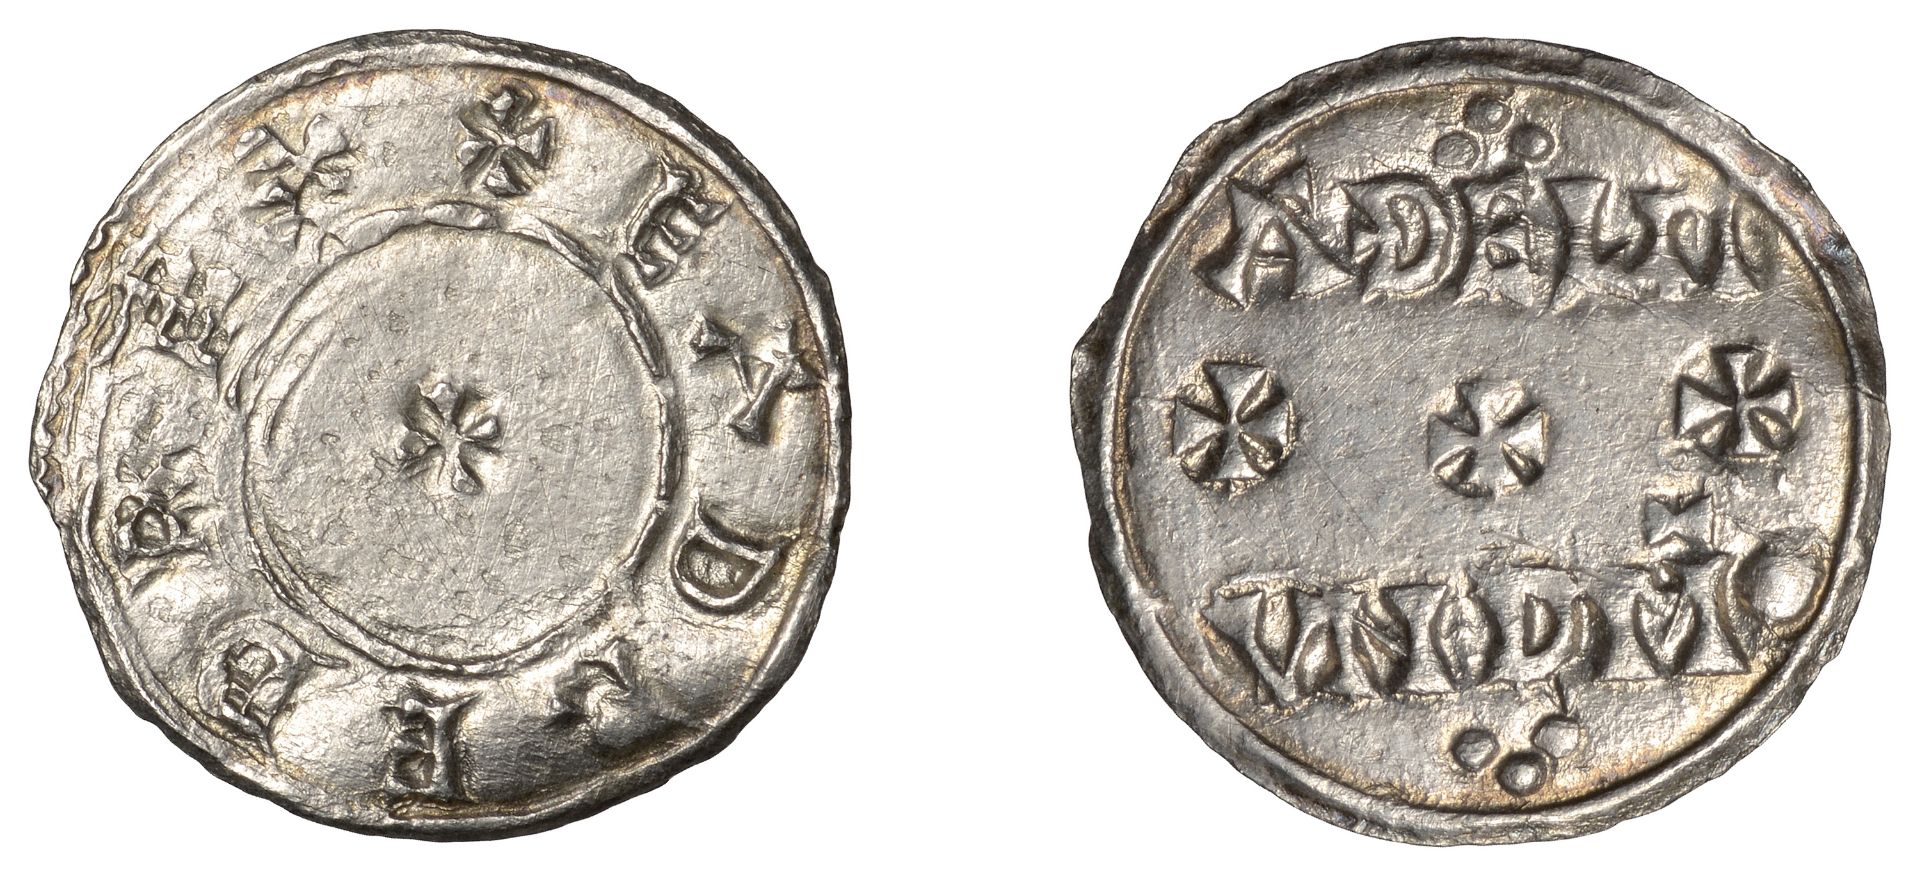 Eadred (946-955), Penny, Two Line type [HT 1], Ã†thelmund, rev. Ã¦delm vnd mo in two lines div...